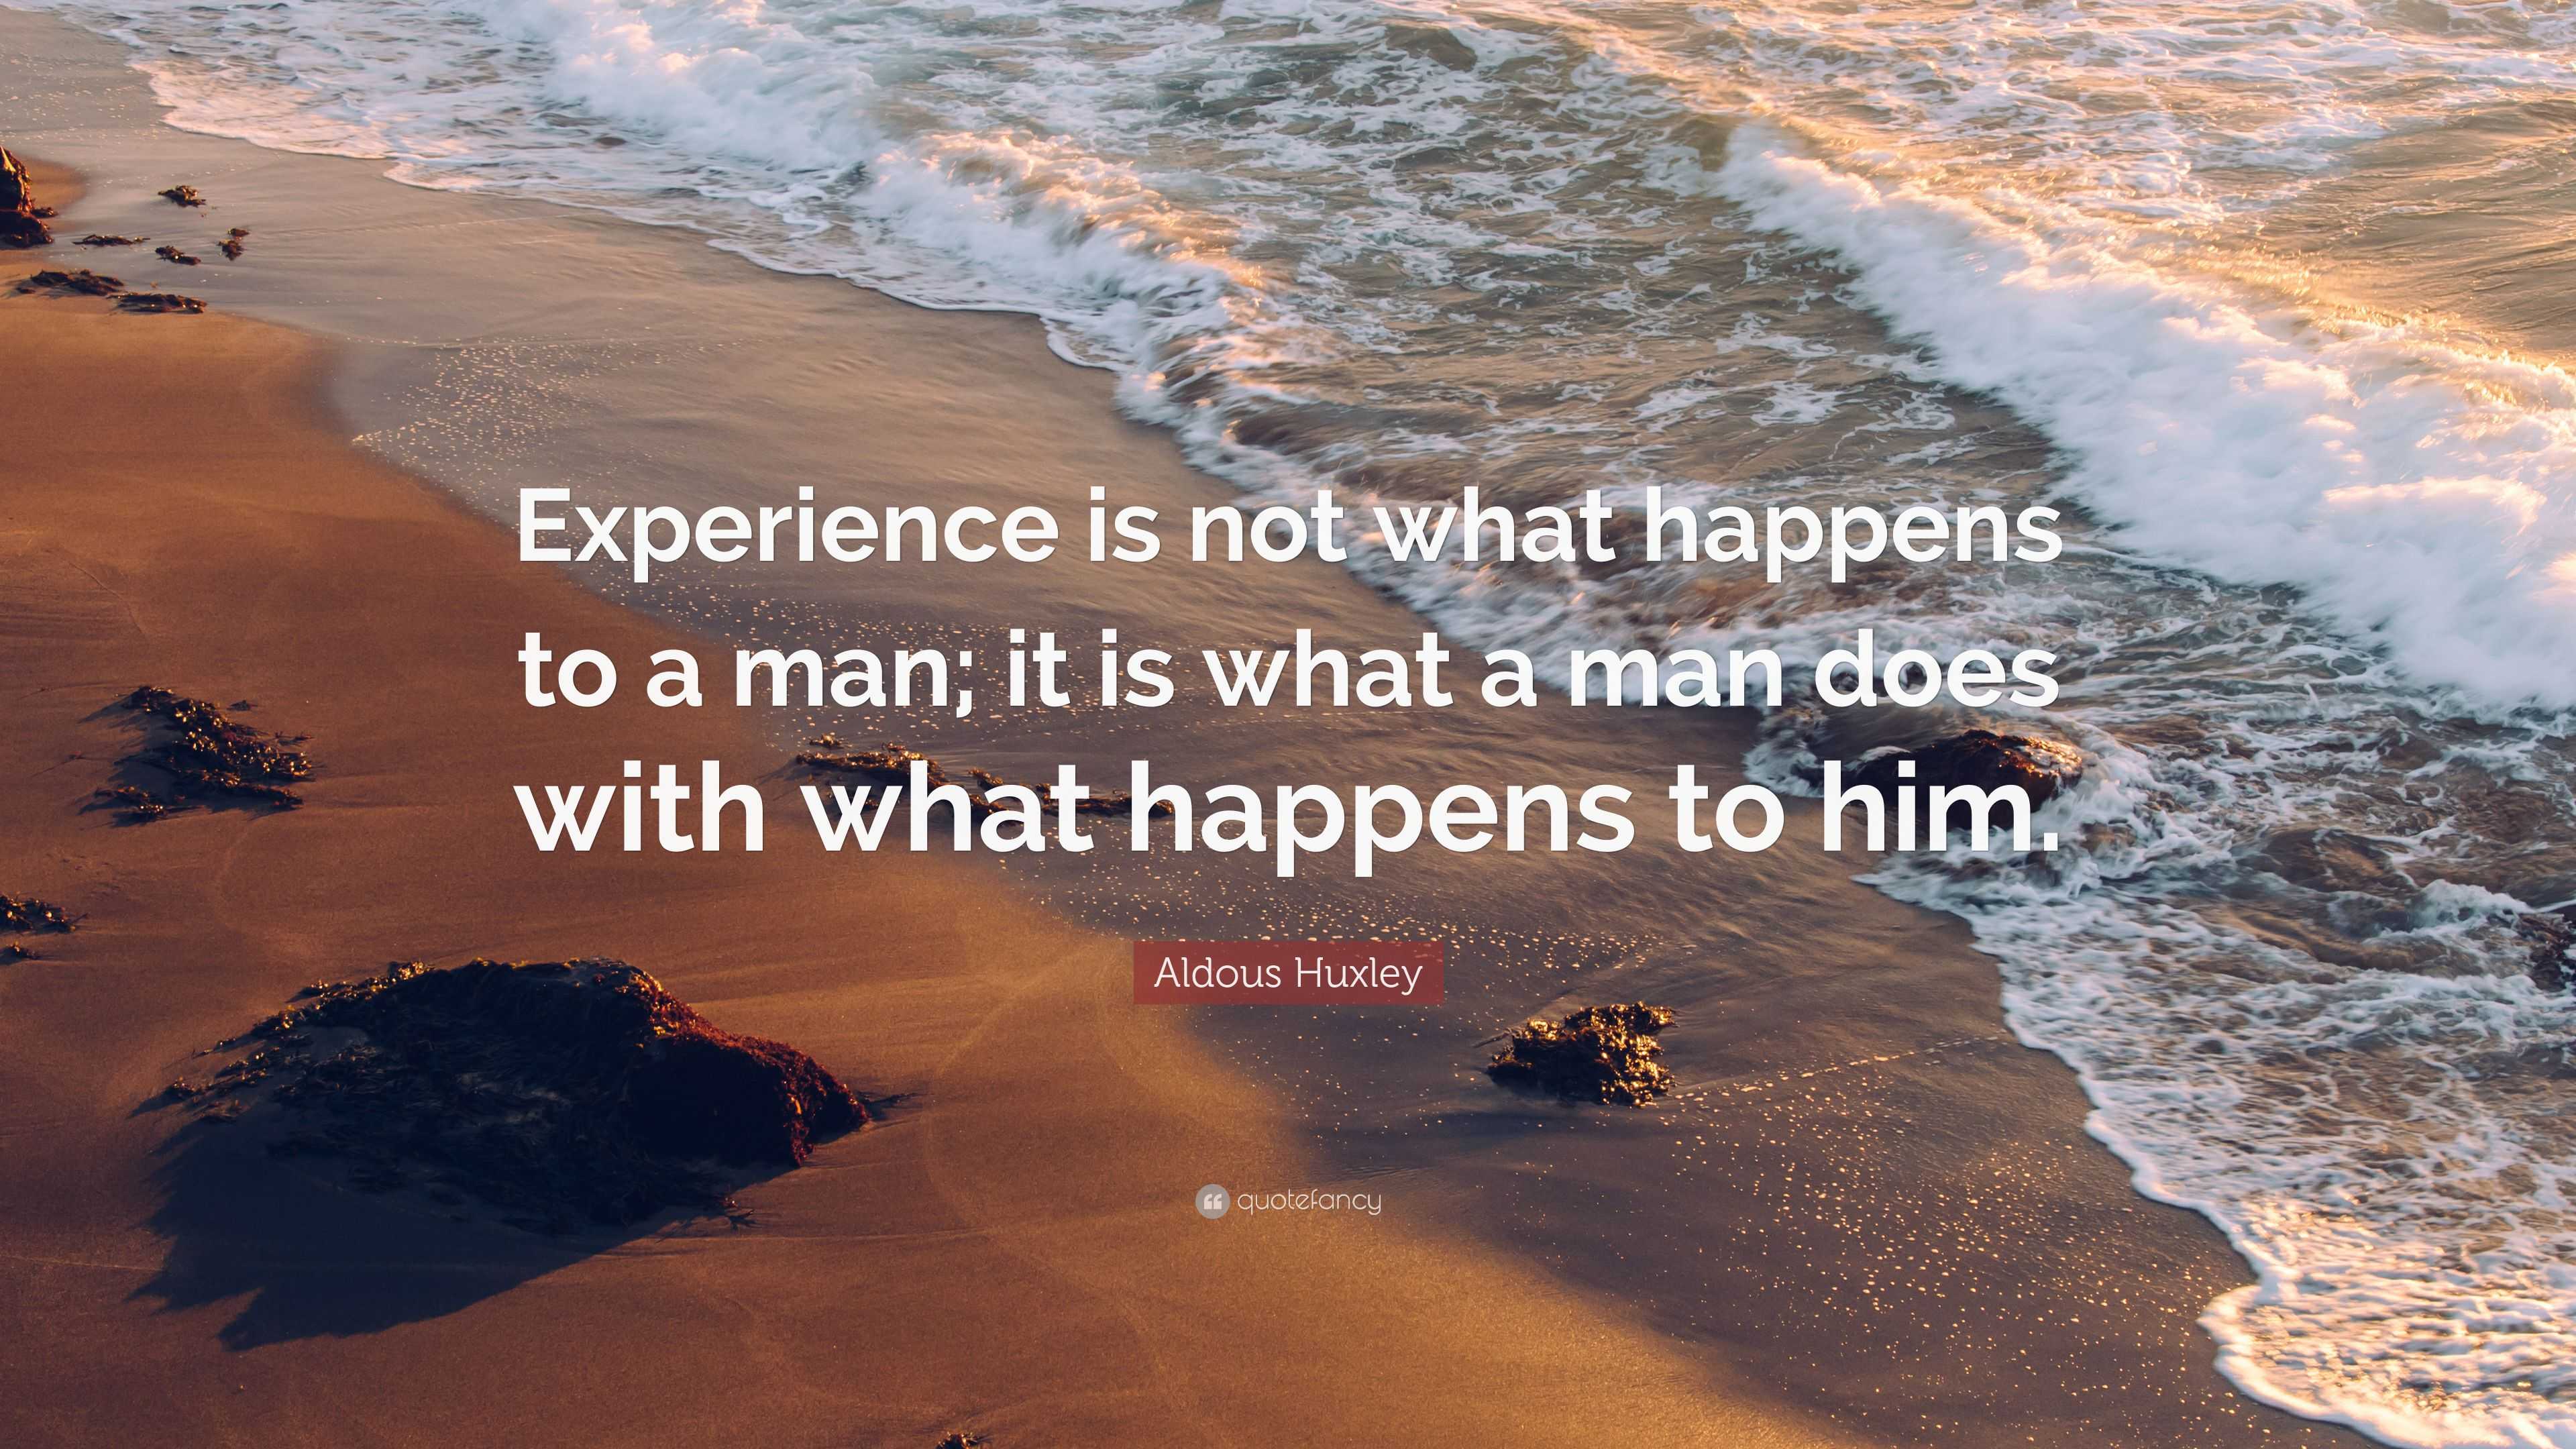 aldous huxley quote experience is not what happens to you